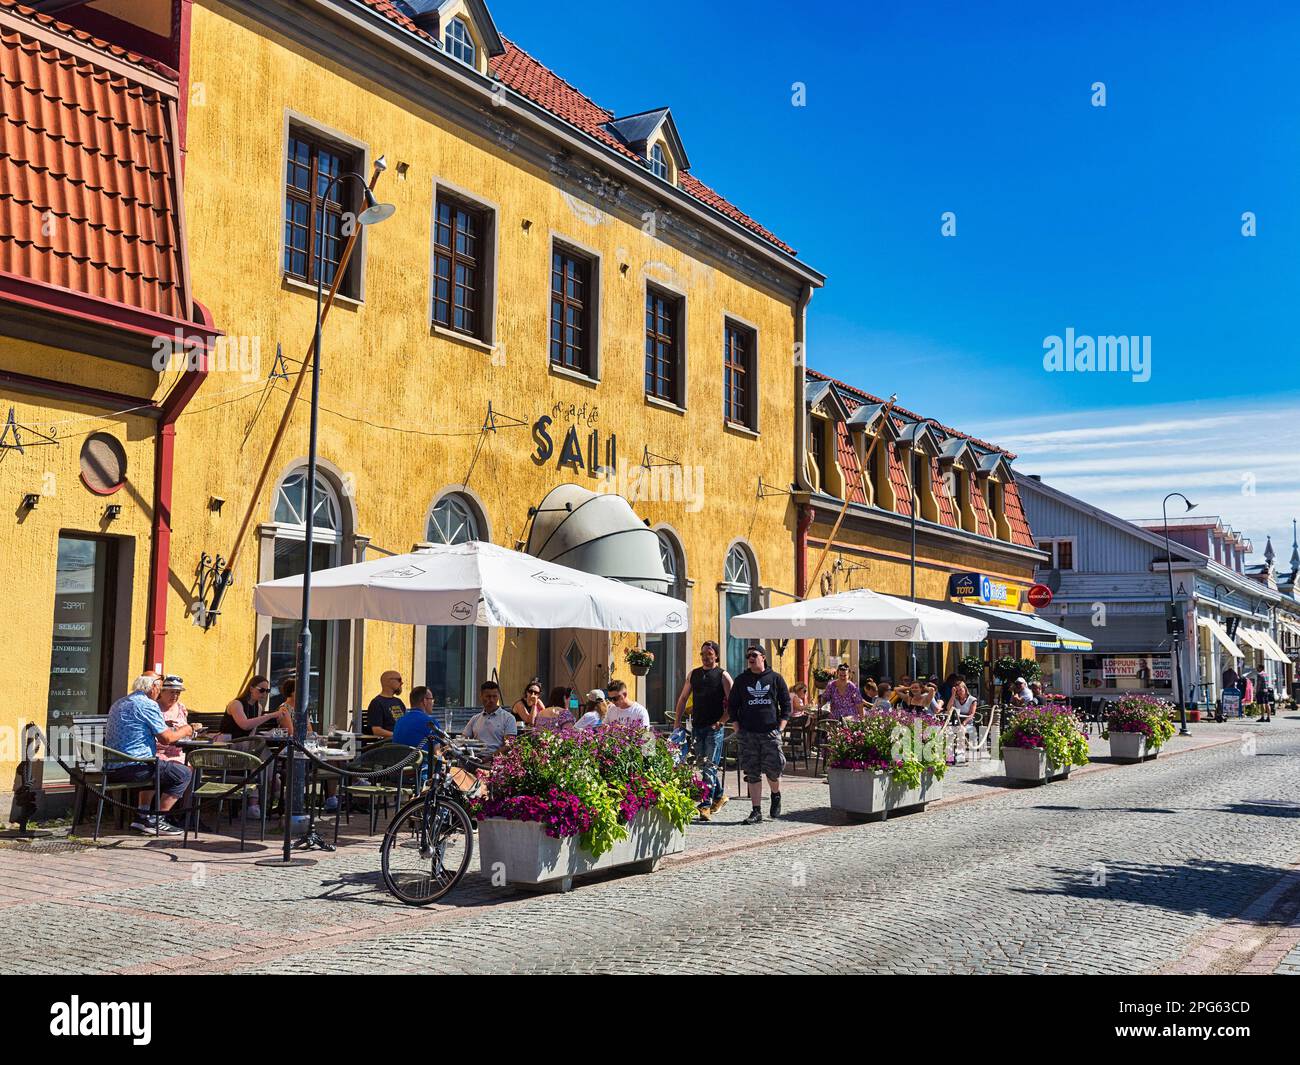 Cafe, Pedestrians in the Old Town, UNESCO World Heritage Site, Summer in Rauma, Satakunta, Finland Stock Photo